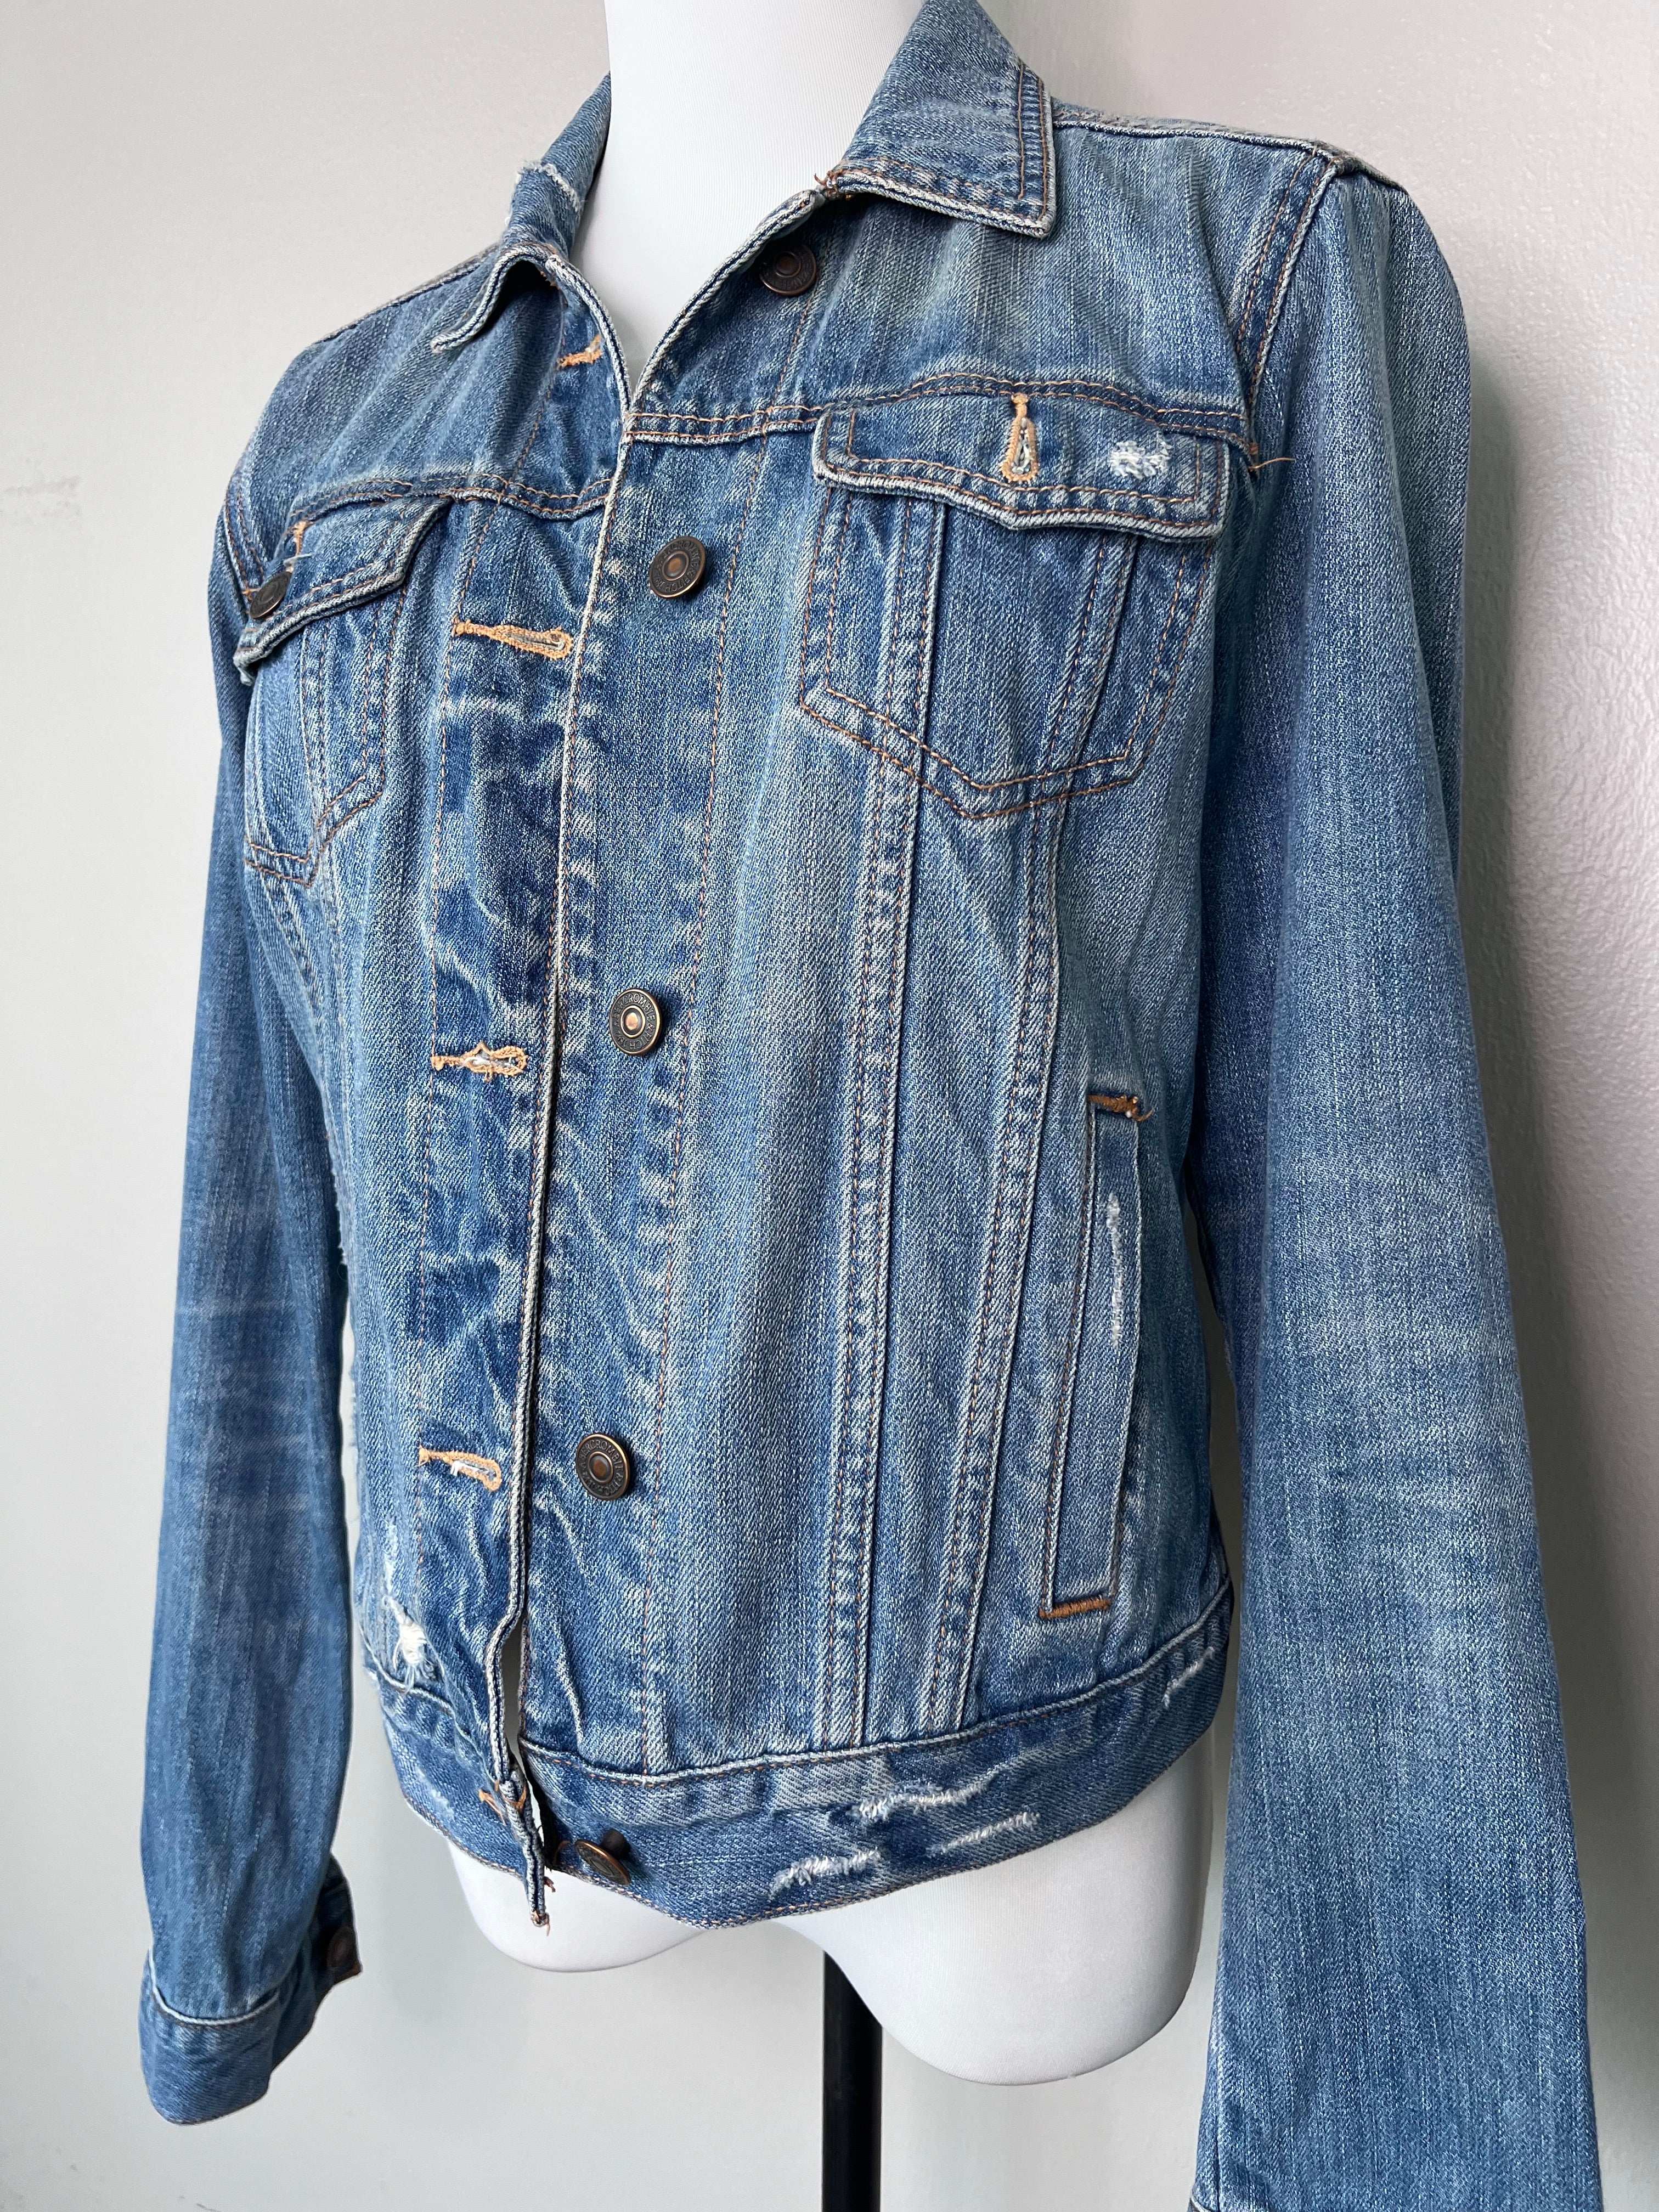 Scuffed up denim jacket with pockets in front and buttons going down along the front side. - AMBERCROMBIE & FITCH